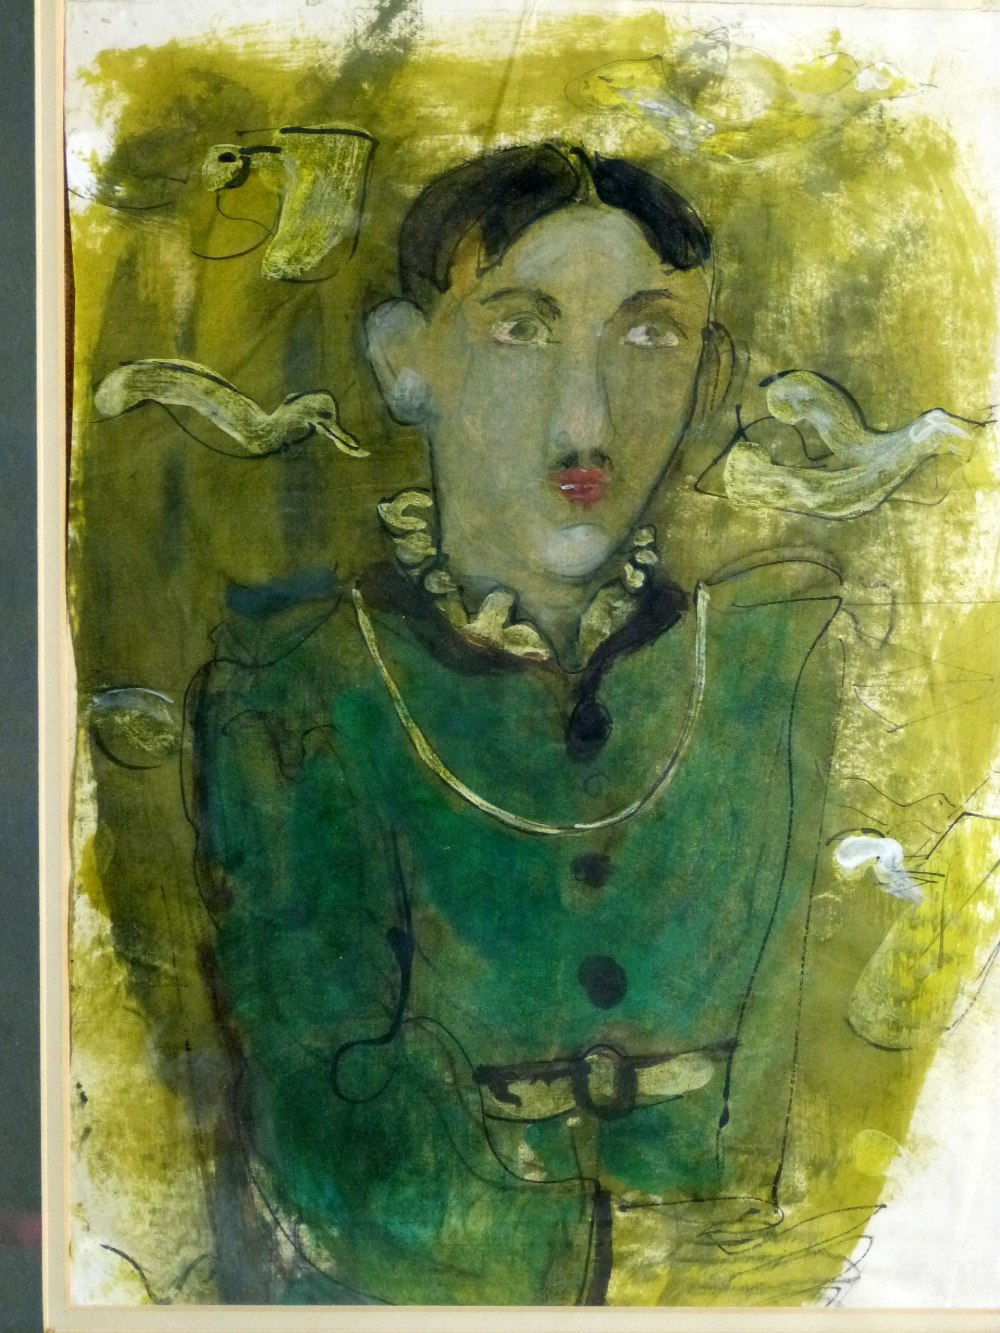 After George Grosz, portrait of a man wearing a green coat, early 20th century, watercolour on